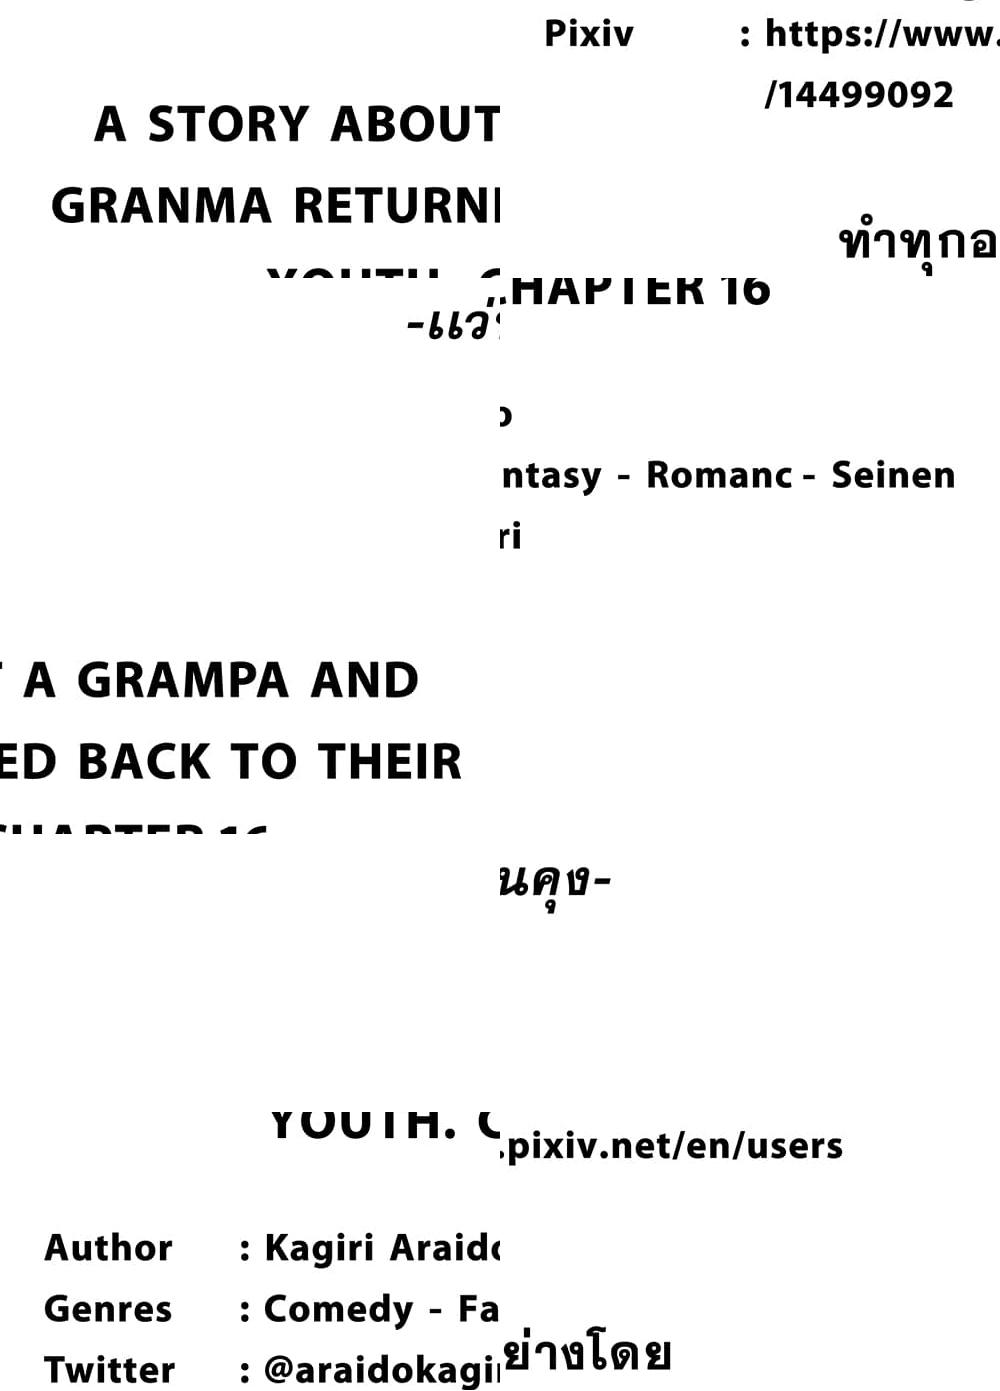 A Story About A Grampa and Granma Returned Back to their Youth - 16 - 1